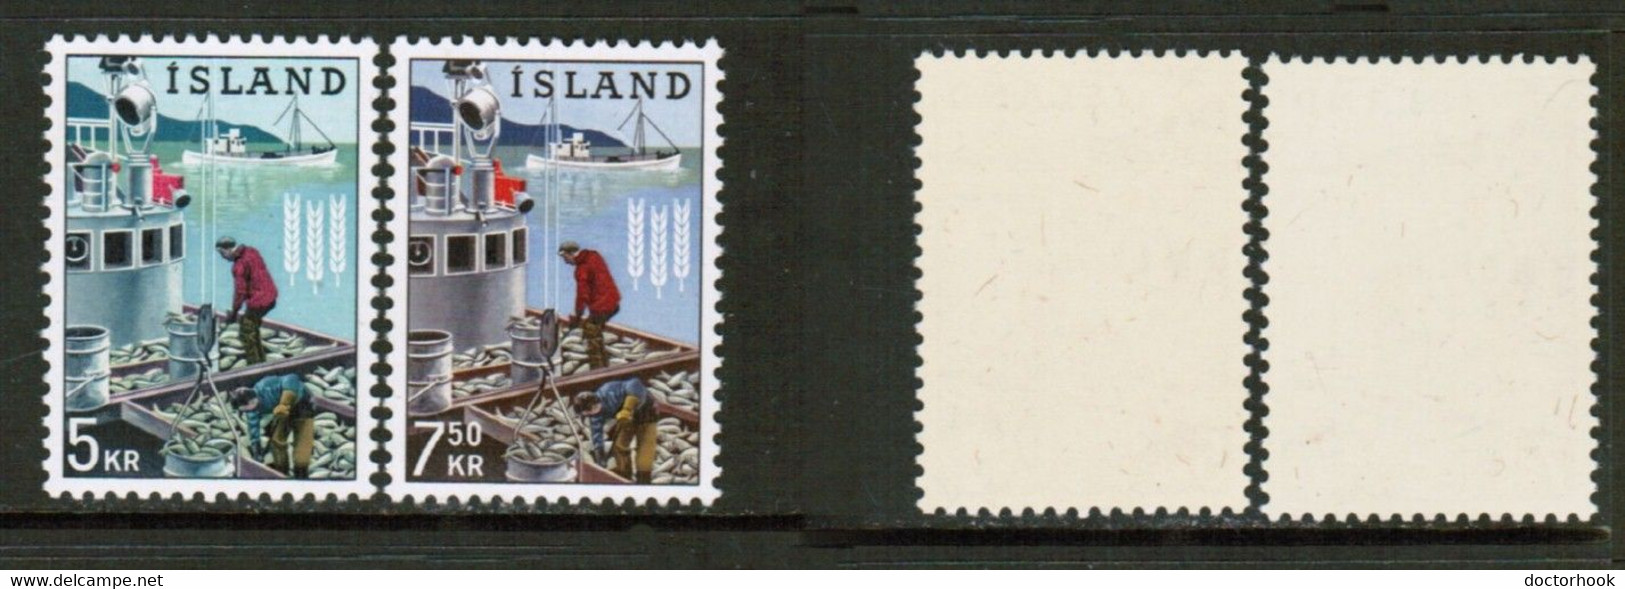 ICELAND   Scott # 354-5** MINT NH (CONDITION AS PER SCAN) (WW-2-50) - Unused Stamps